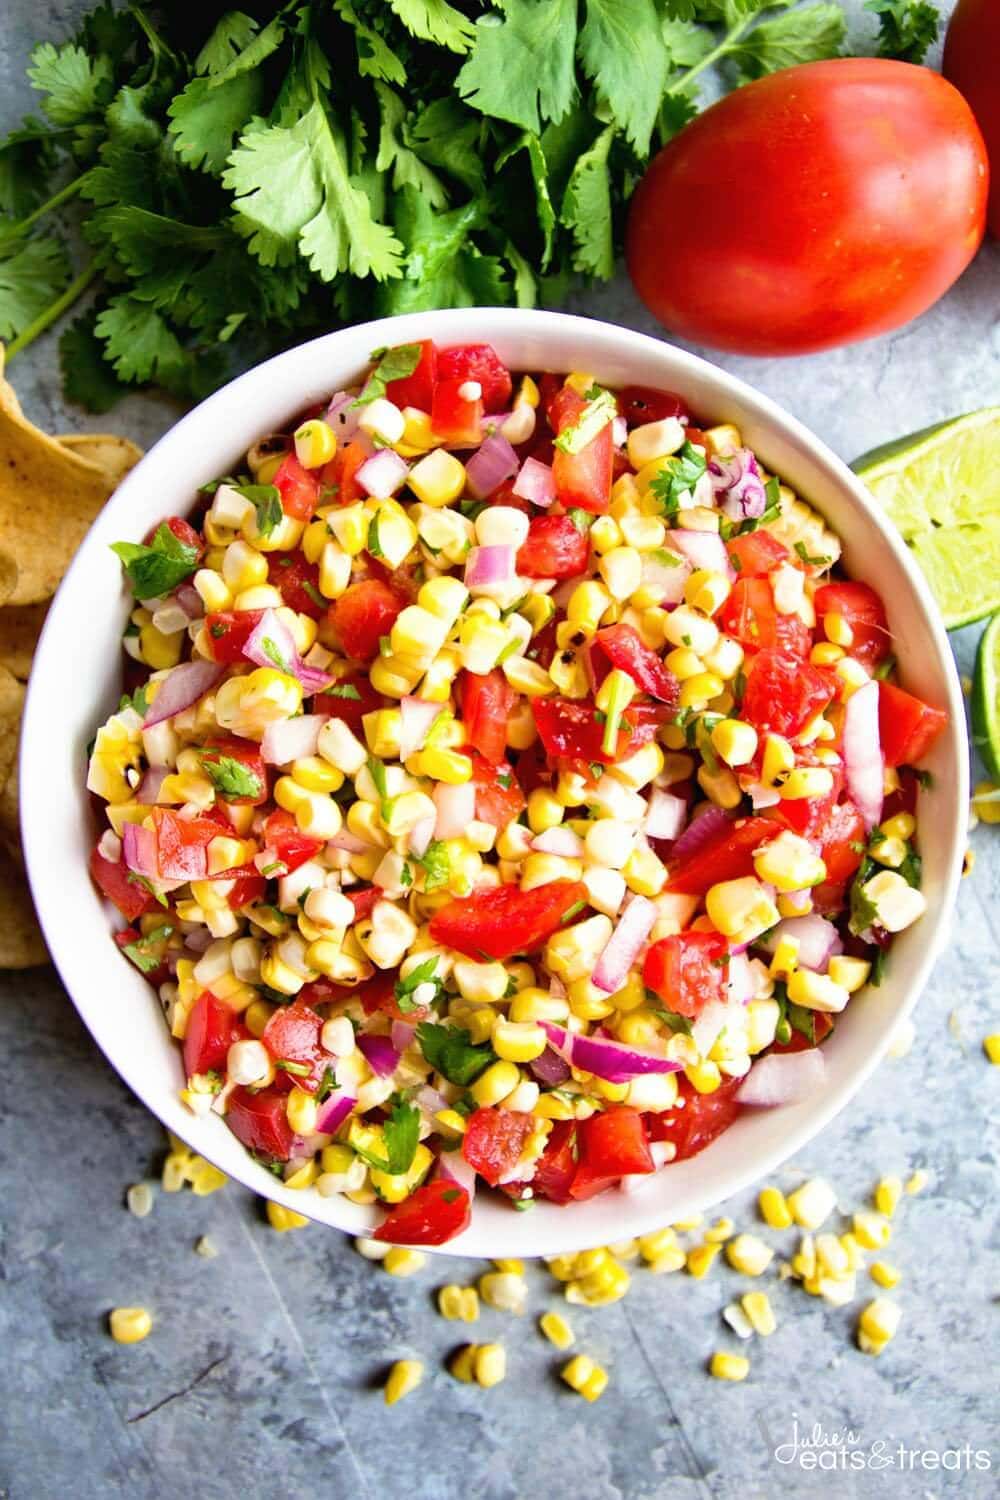 Grilled Corn Salsa ~ Fresh, Healthy and Delicious Salsa Made with Grilled Corn! Perfect for Dipping, Topping or Eating by the Spoonful!